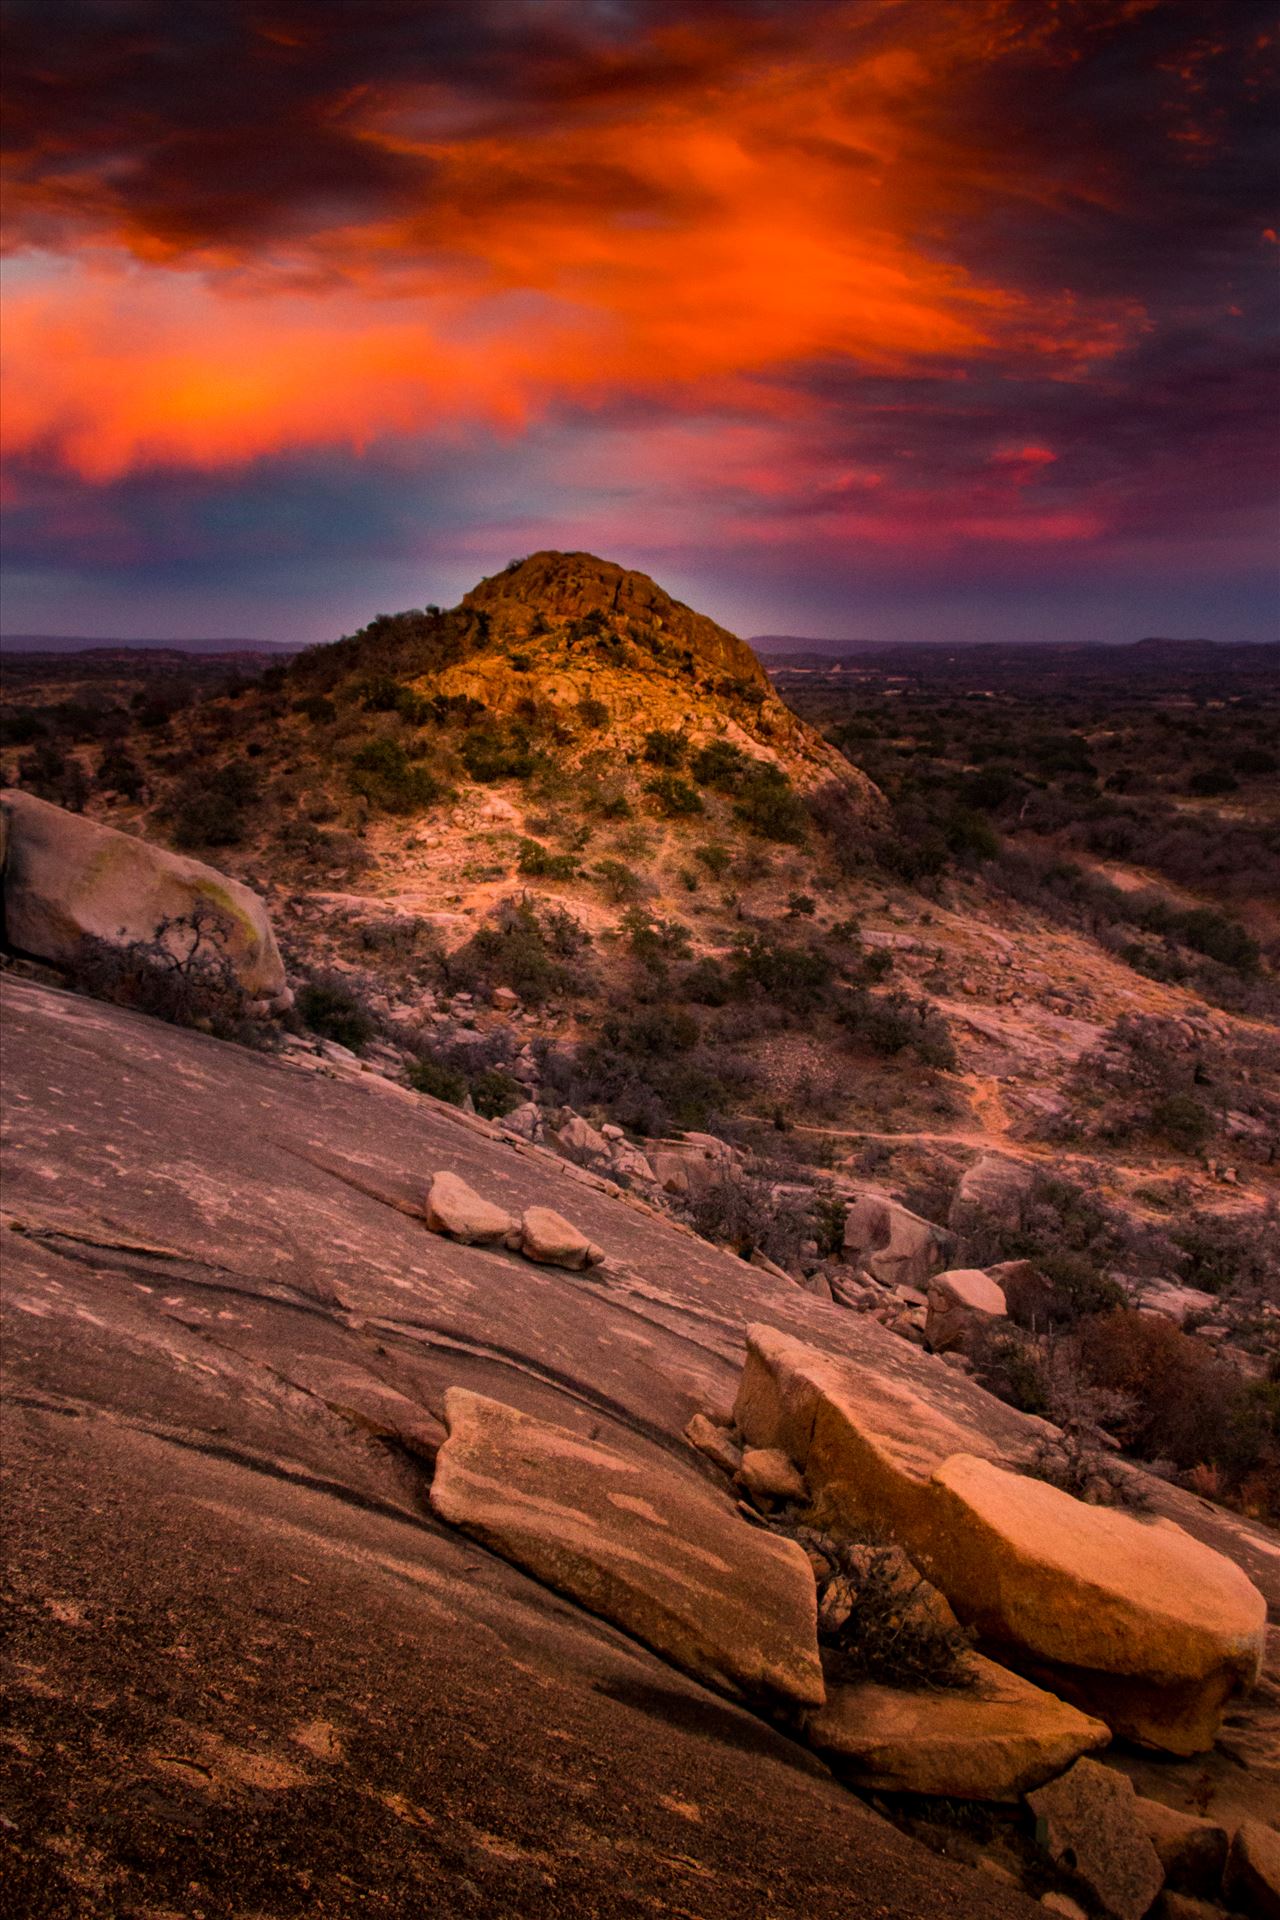 20140112-Enchanted Rock-DSLR-078.jpg  by Charles Smith Photography